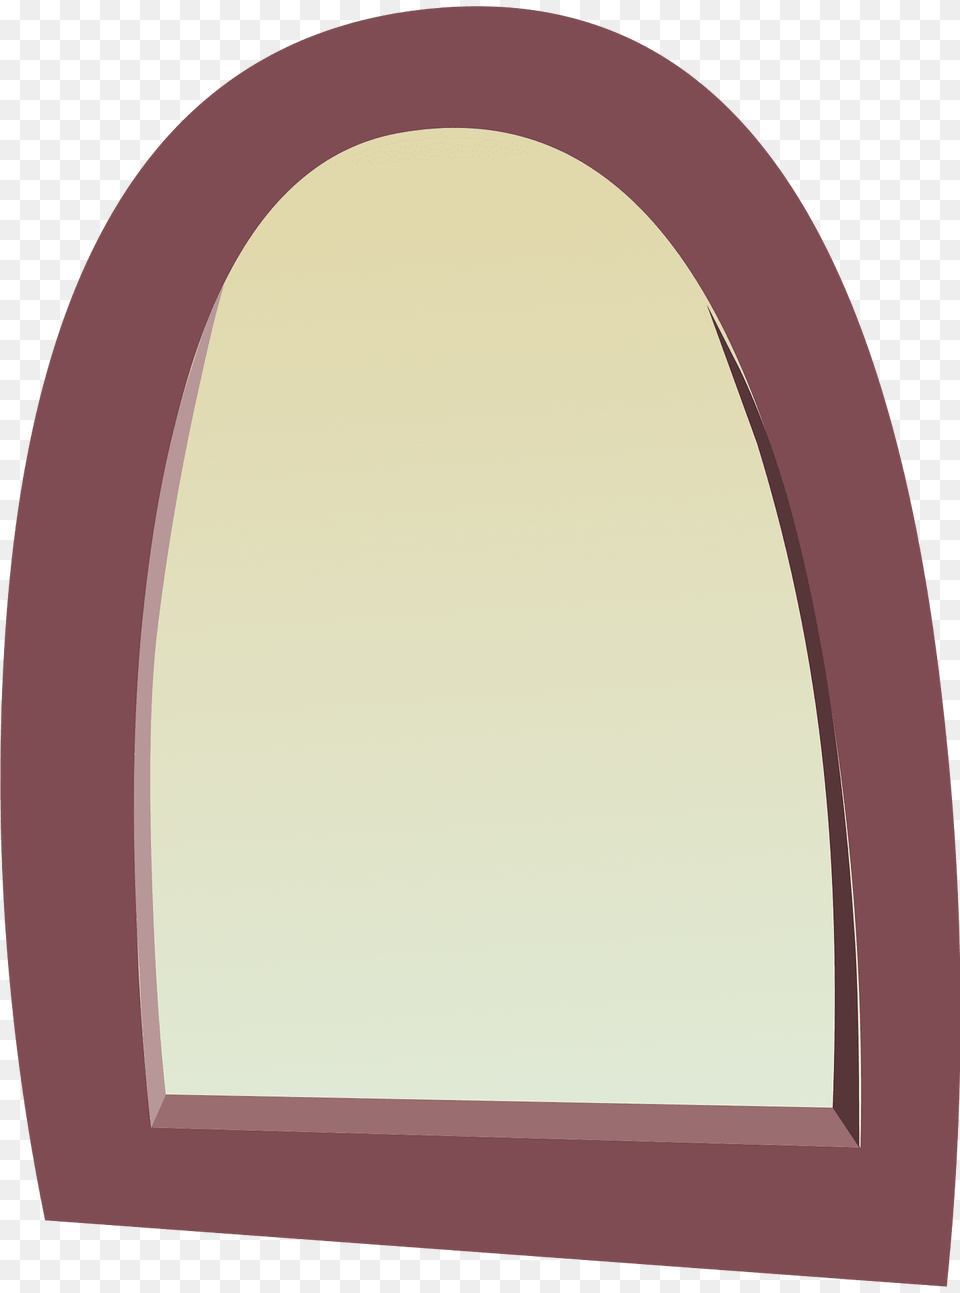 Rounded Window Up Clipart, Arch, Architecture, Home Decor Png